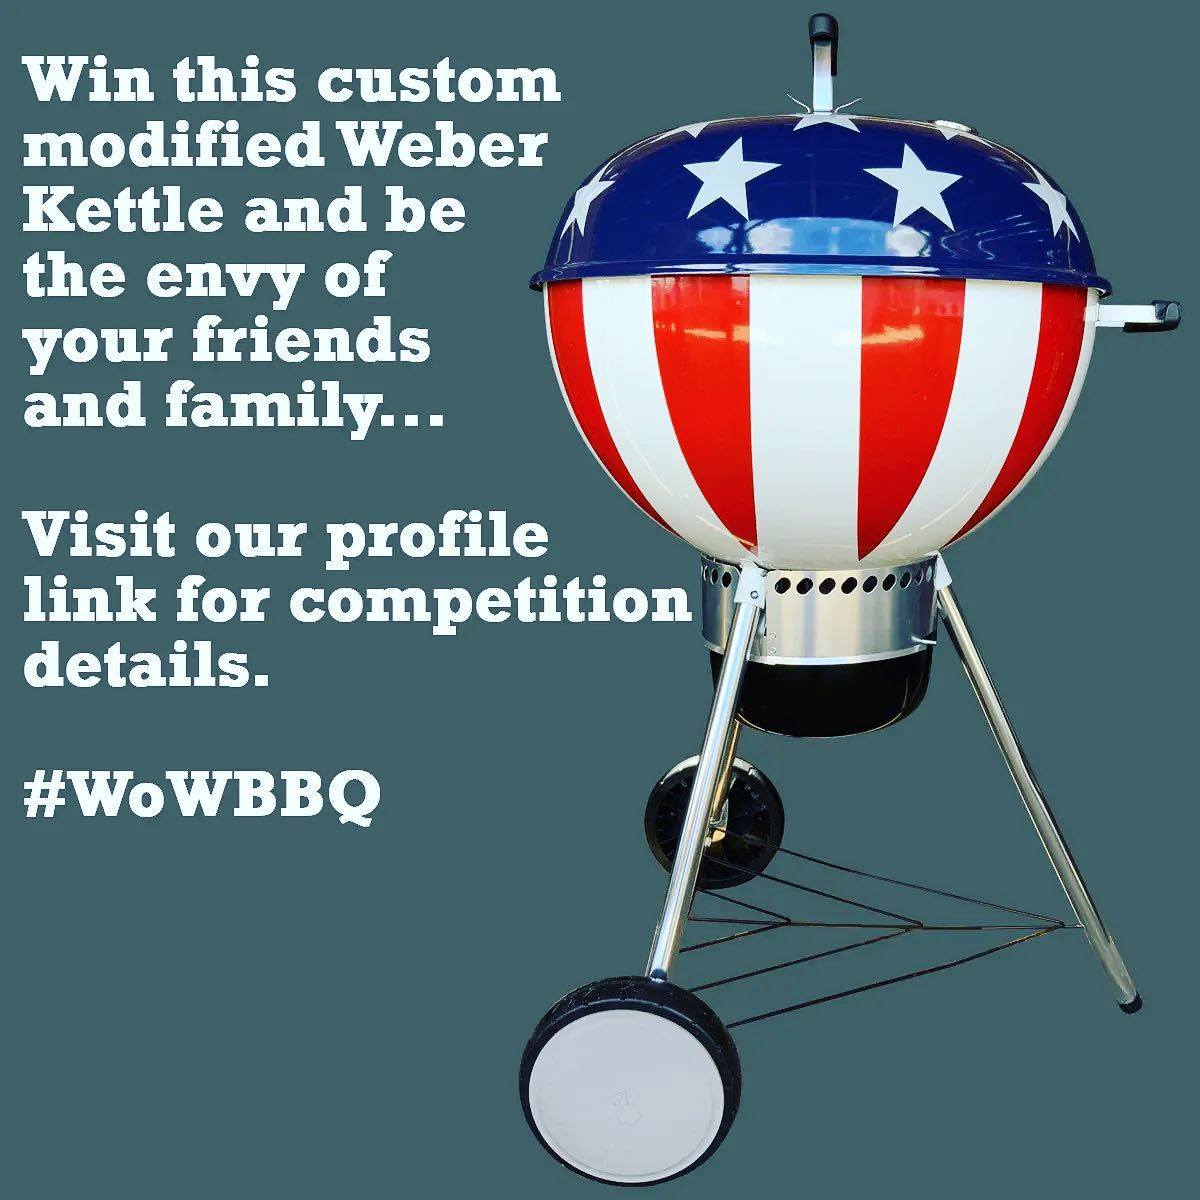 #WoWBBQ
How fantastic is that kettle!
Check it out and get your chance @WoWBBQ